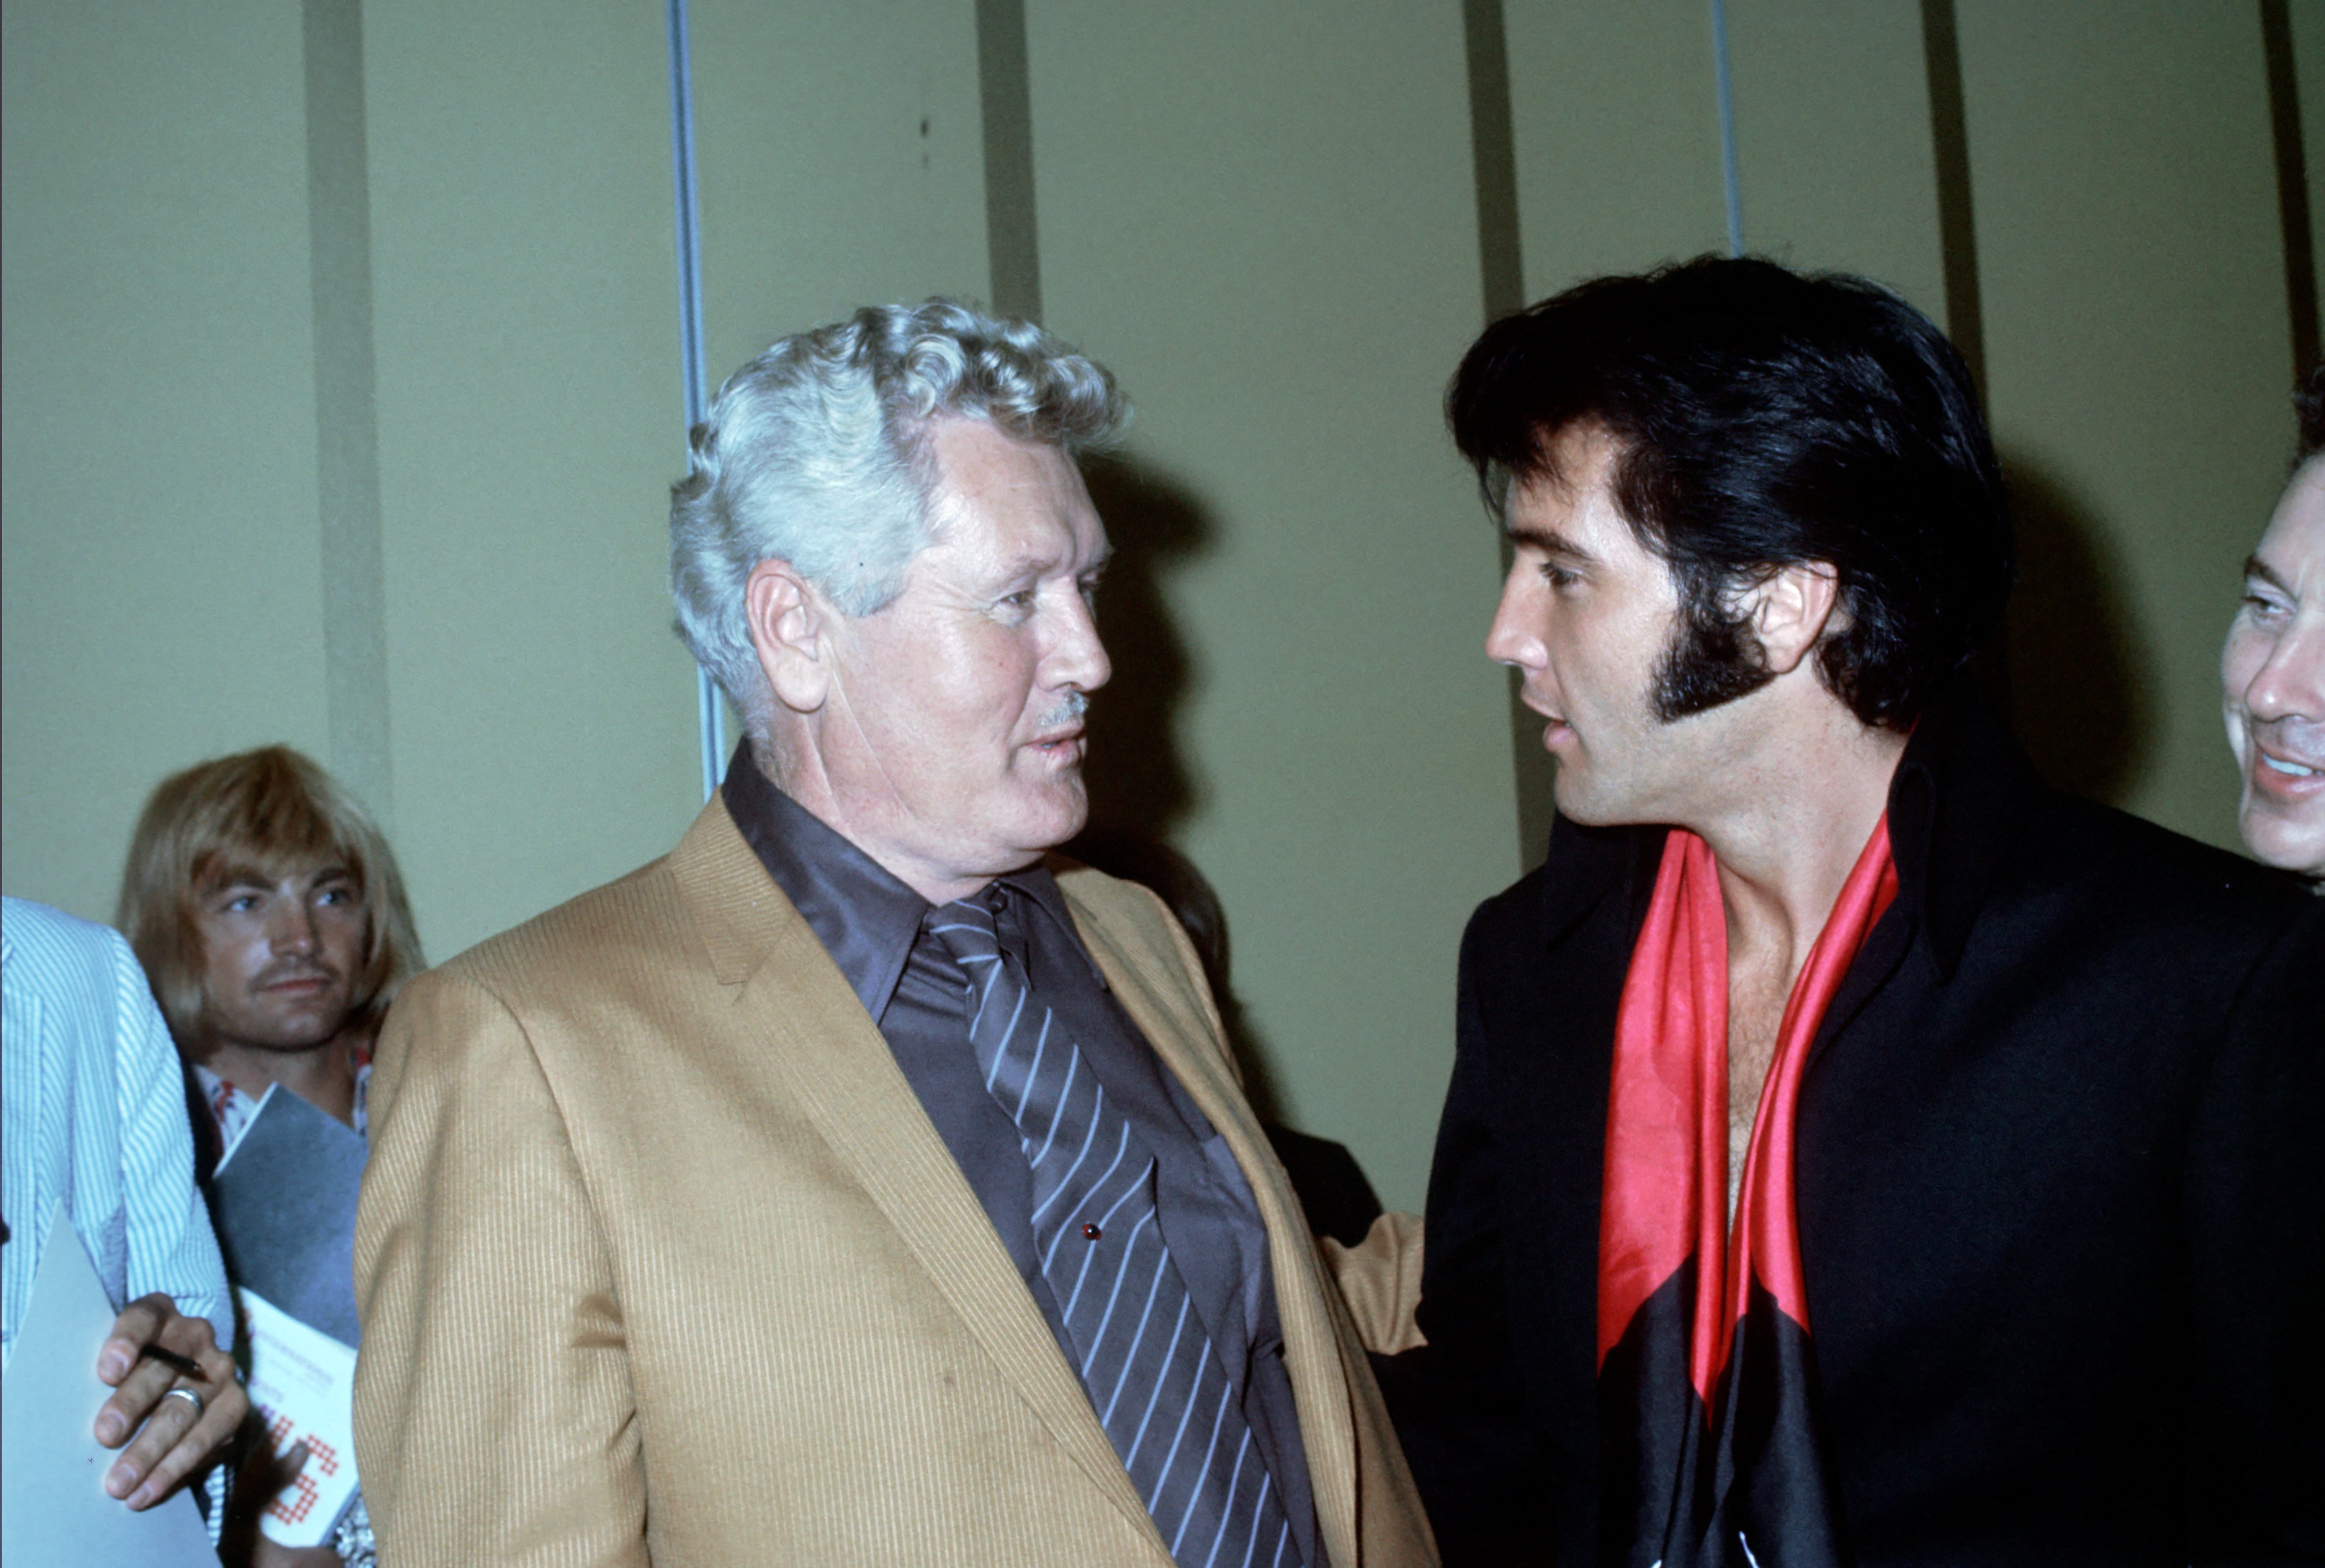 Vernon Presley wears a brown jacket and talks to Elvis Presley, who wears a red shirt and black jacket. There are several other people in the room.